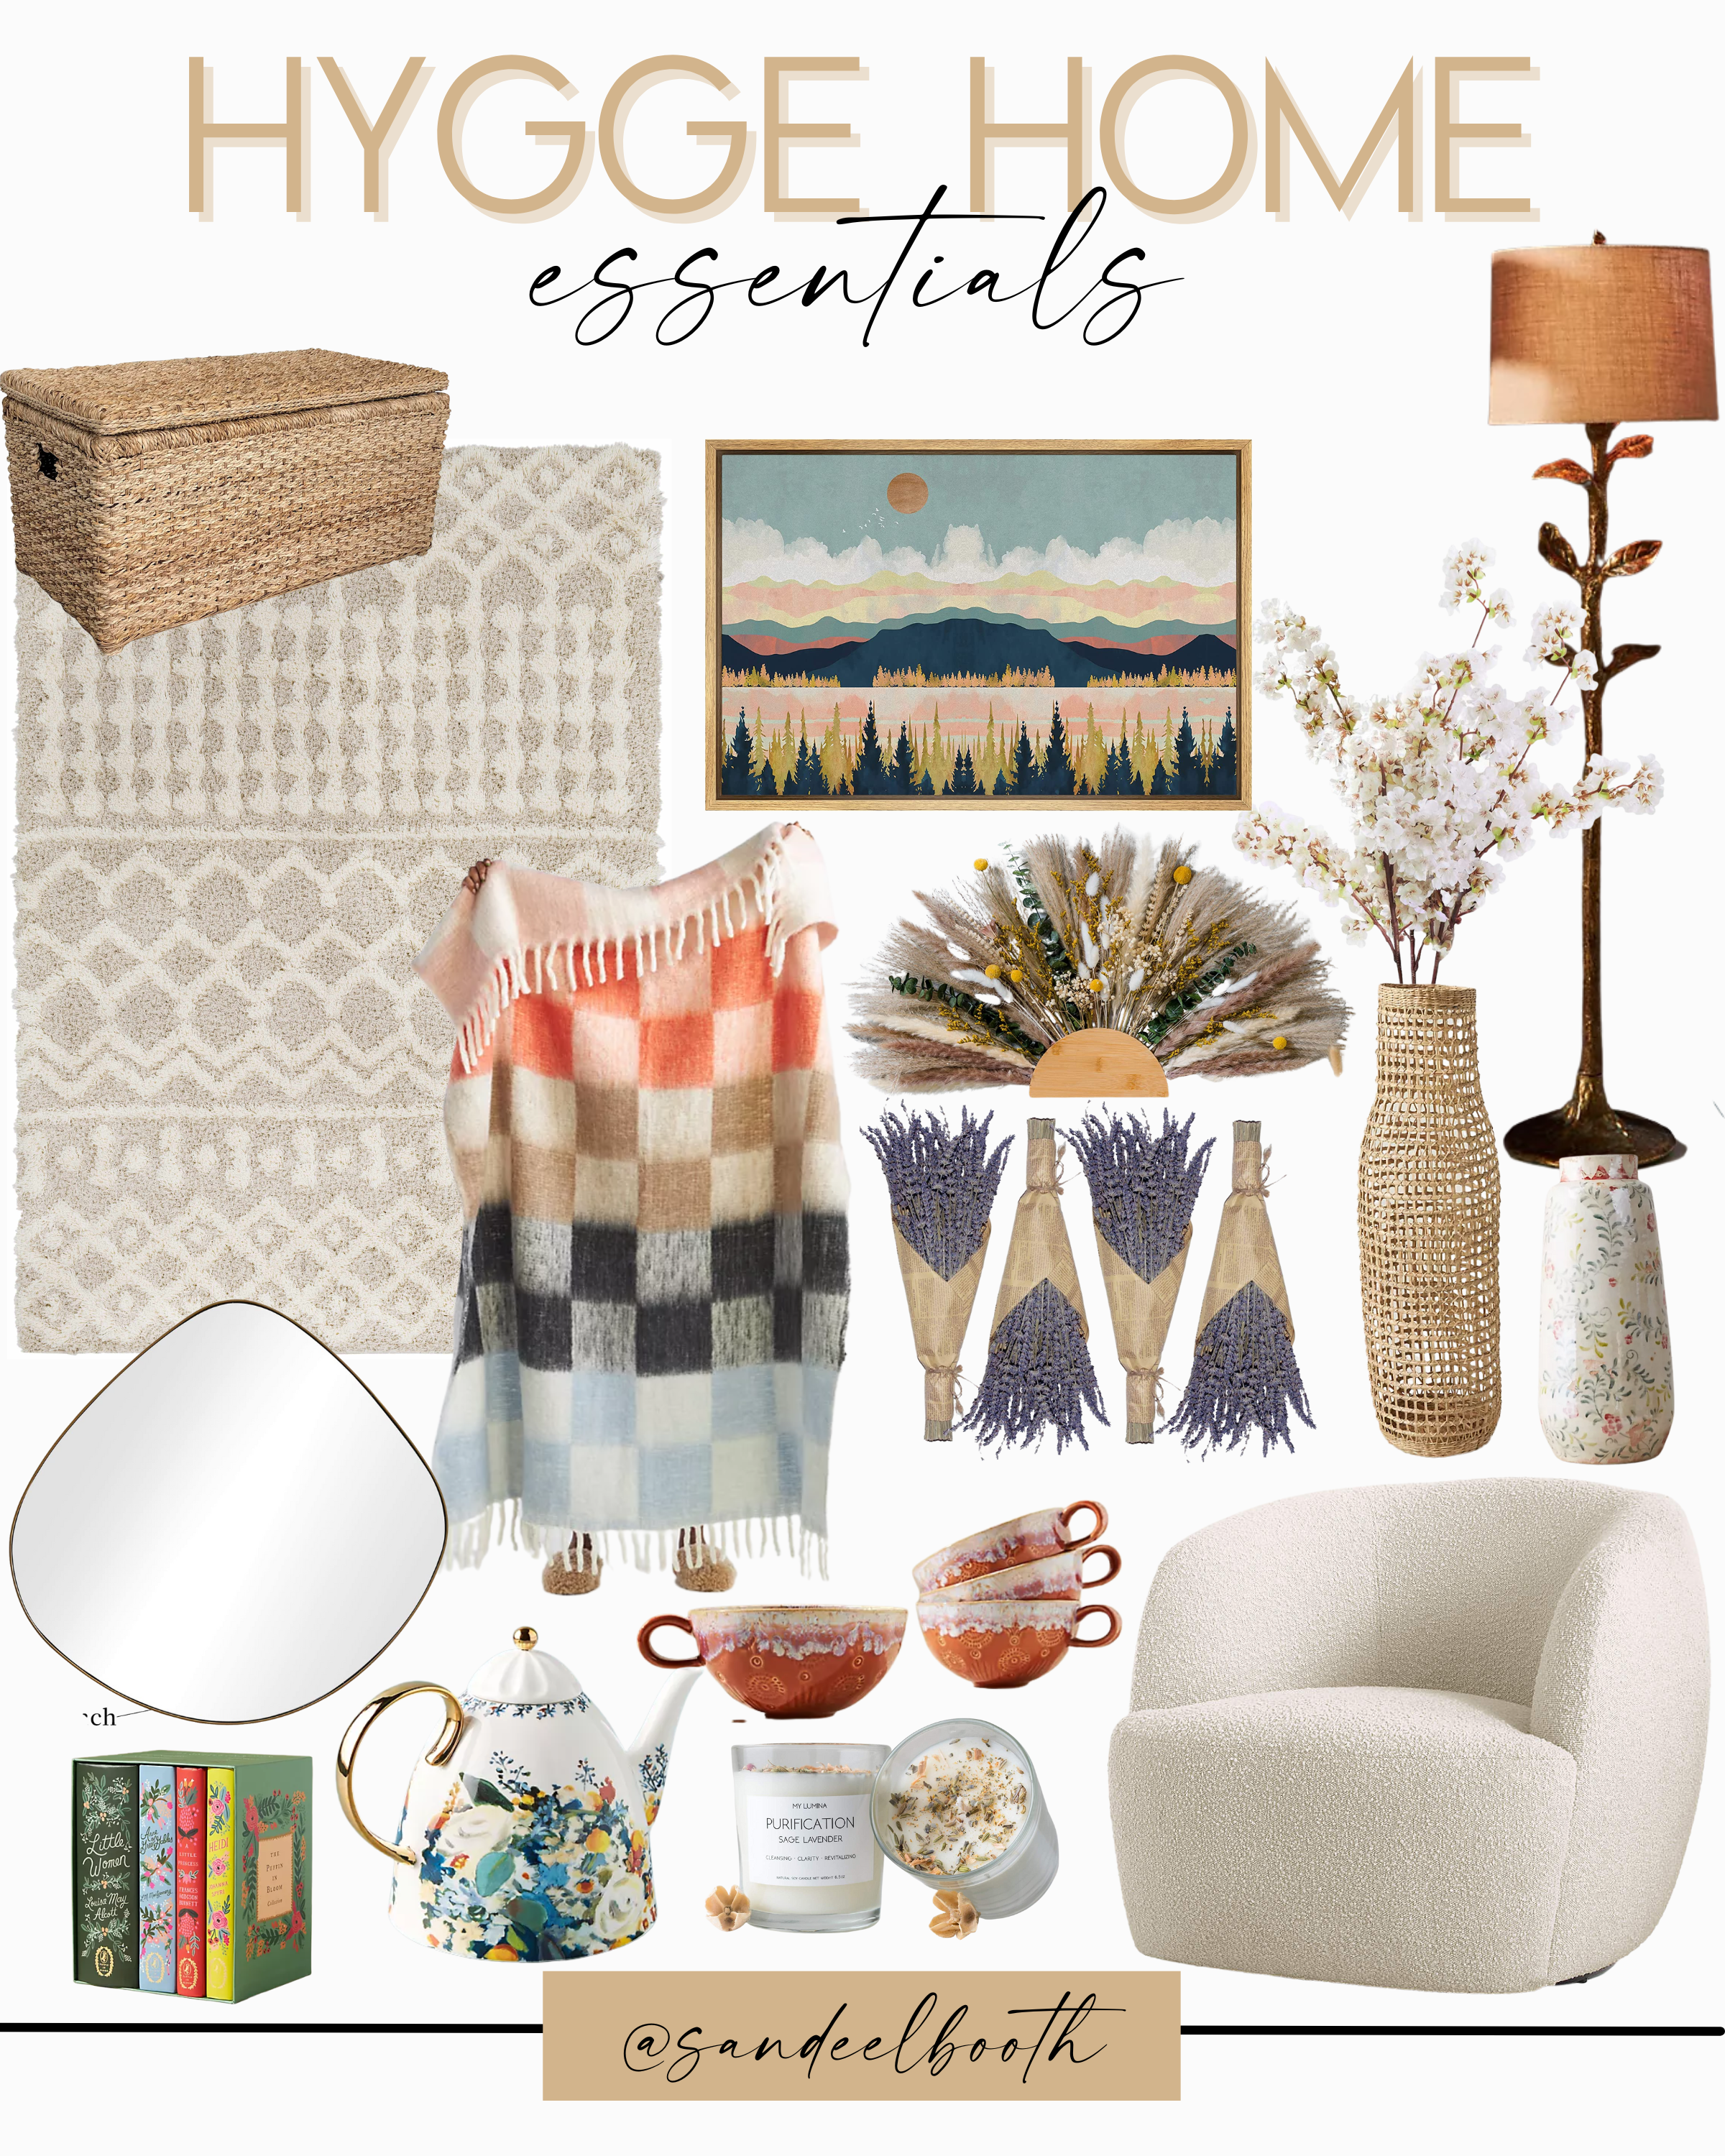 collage of items to Creating A Hygge Home